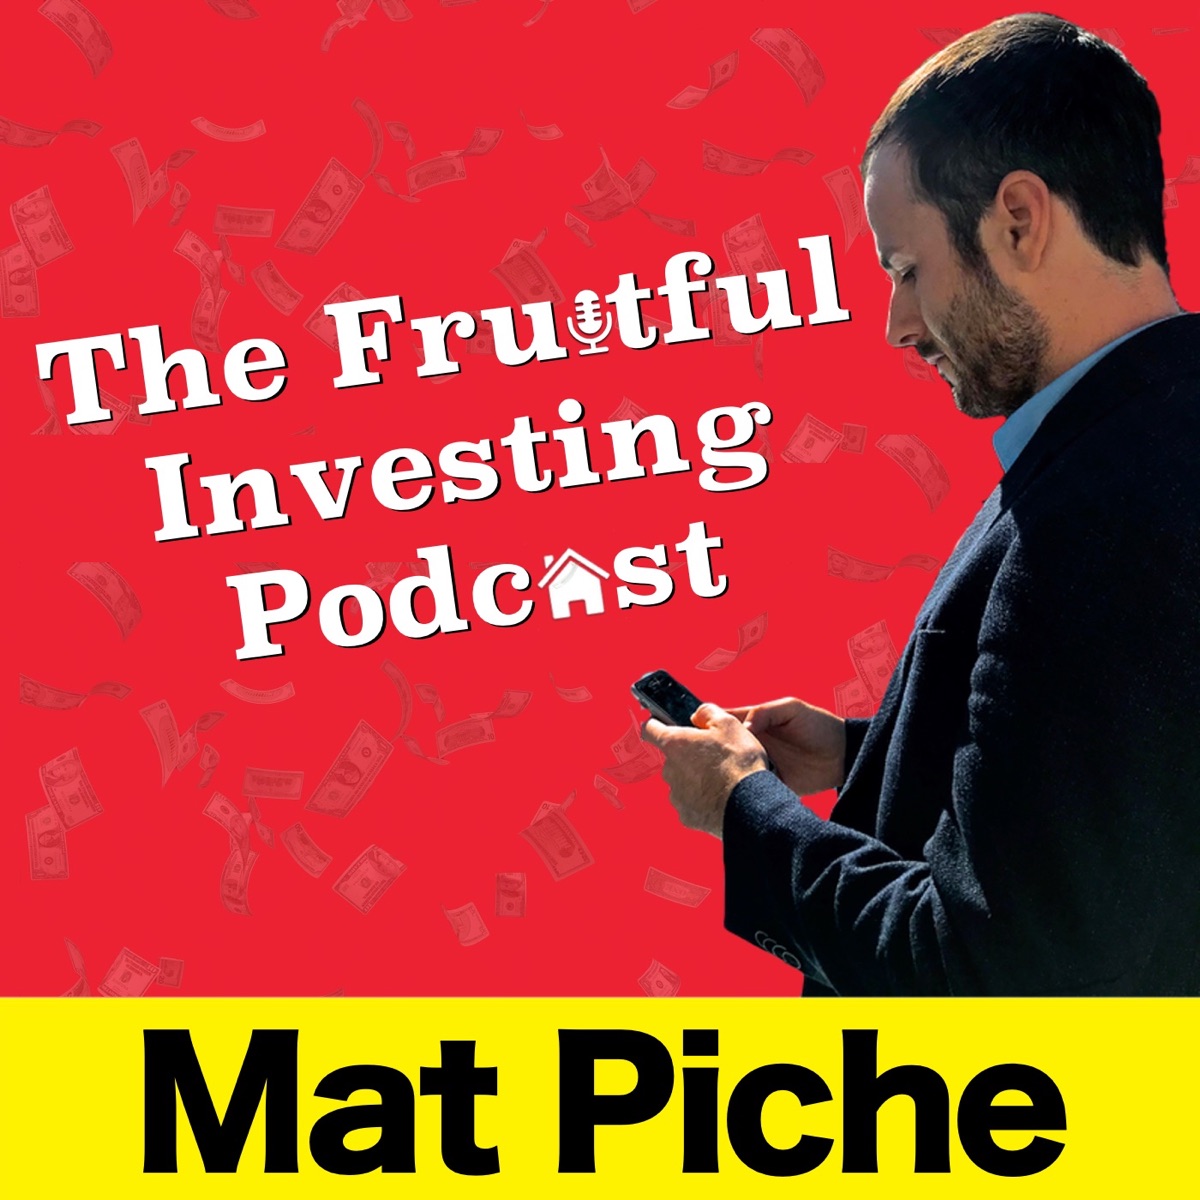 The Fruitful Investing Podcast